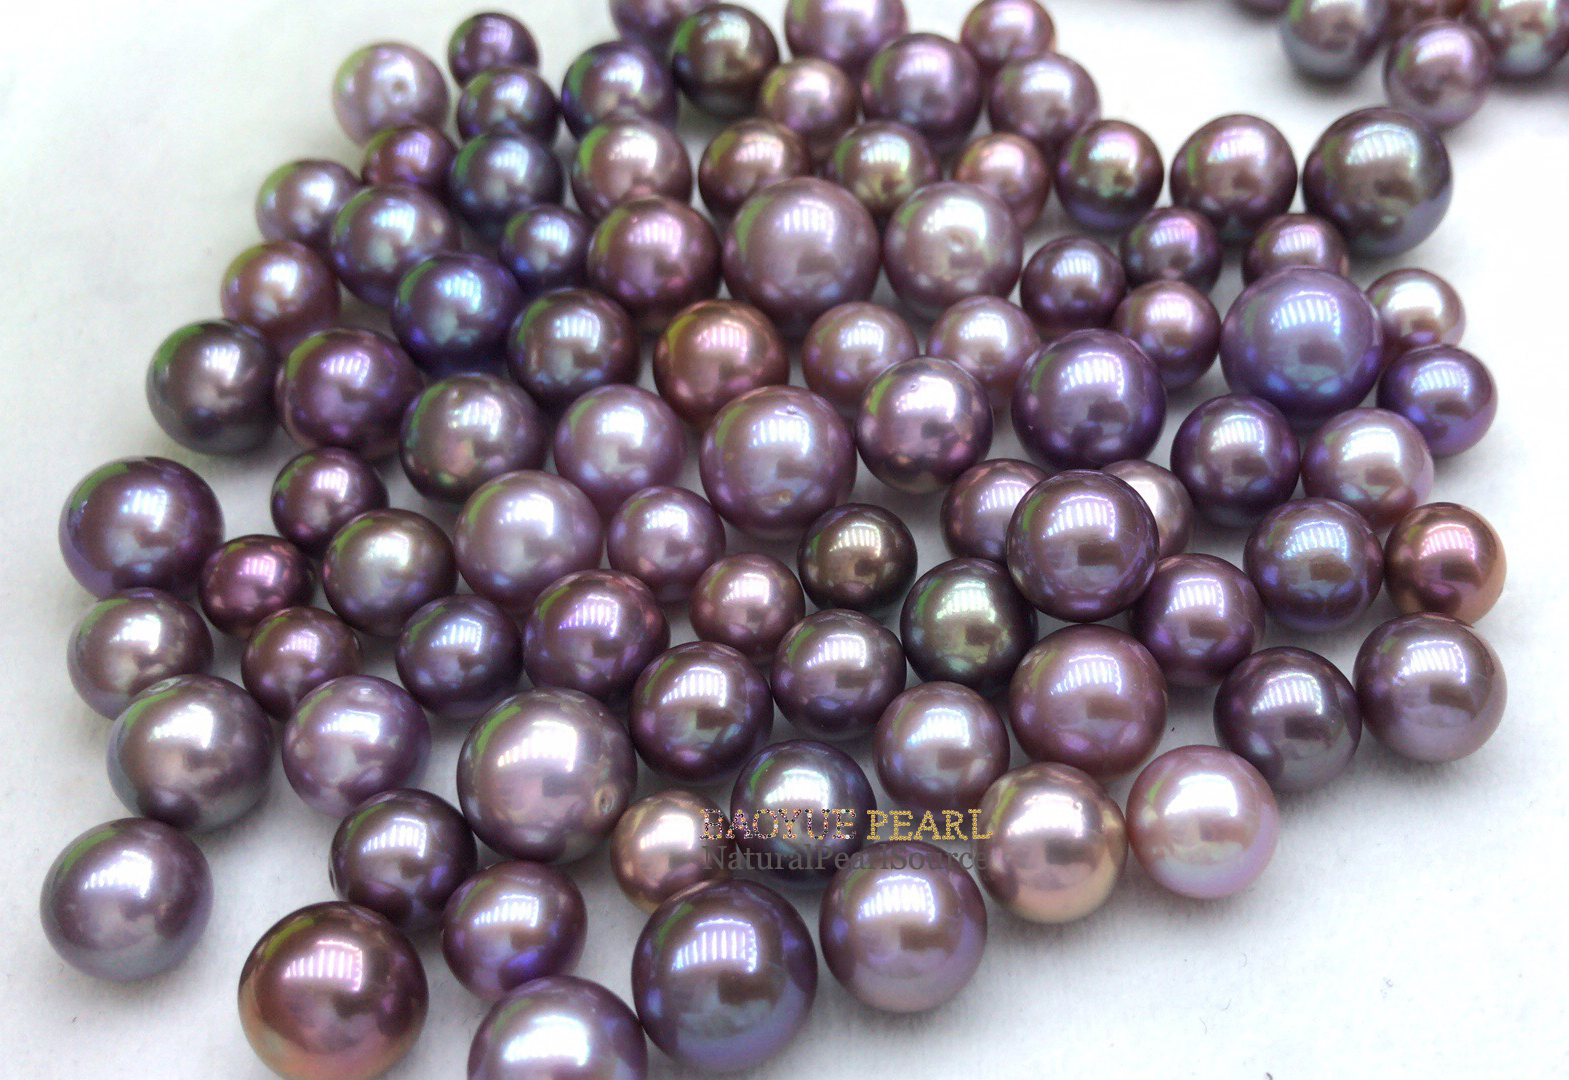 10-15 mm AA Violet Pearls Purple pearl near round nature loose freshwater pearl wholesale DIY BEADS,half,OR no hole